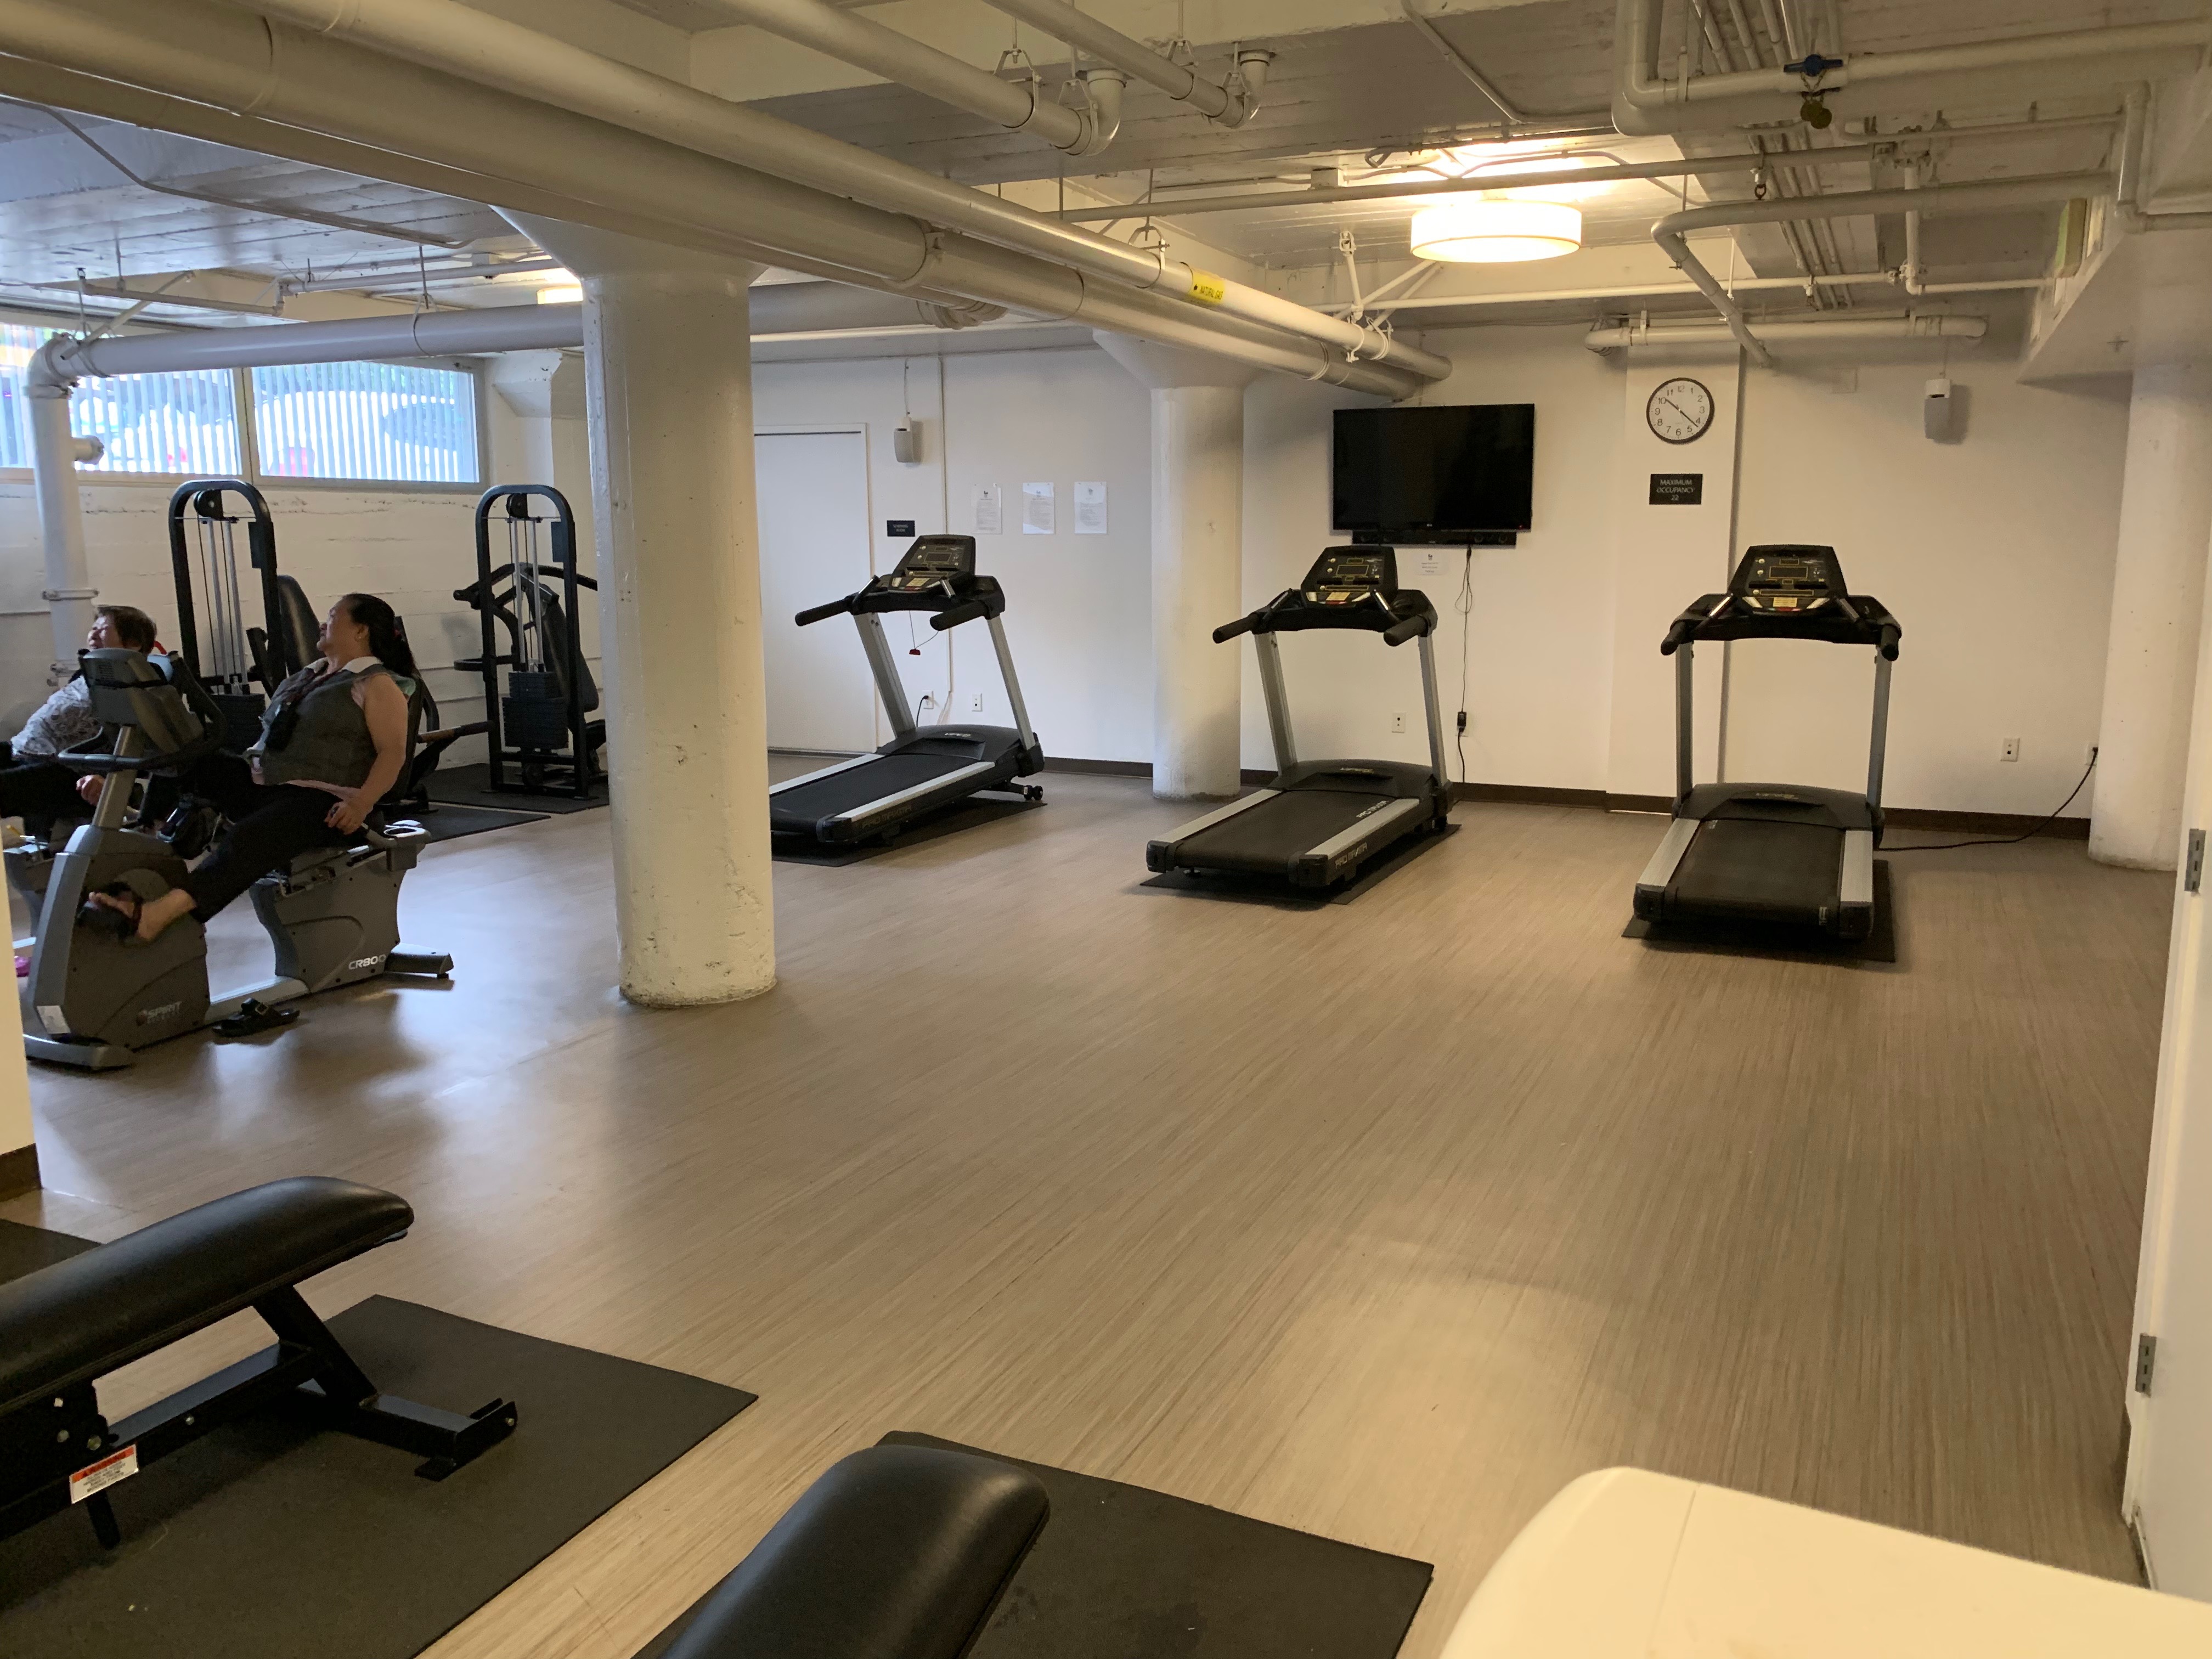 Fitness room that consists of a couple of treadmills, bench presses, weight stack machine and excercise bike machine. There is also a flat screen and clock on the wall.